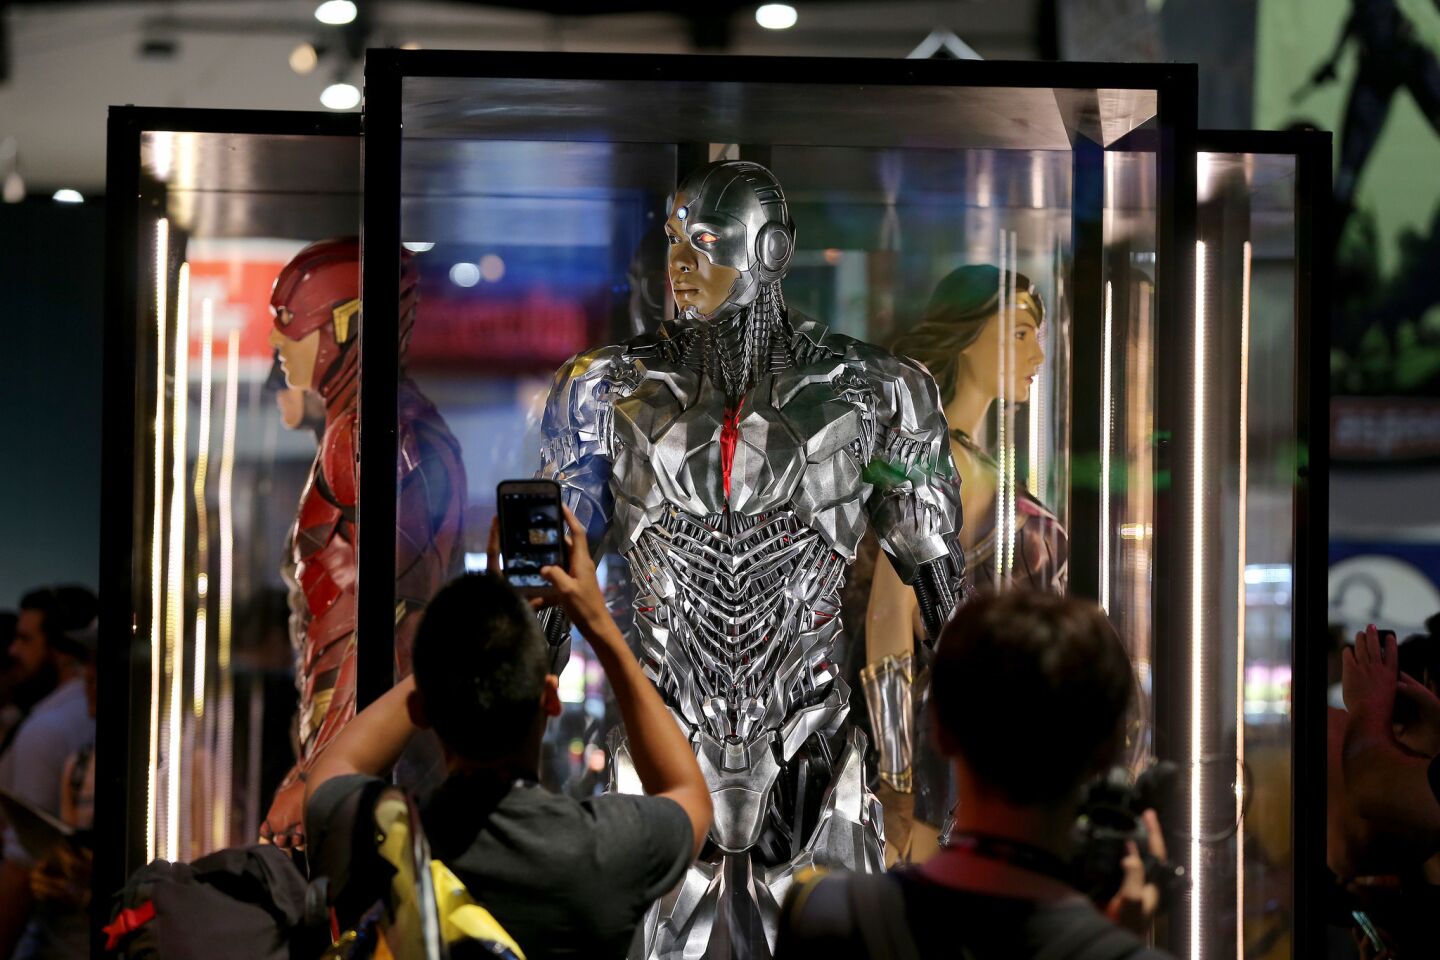 Fans view a DC Comics display of Cyborg, center, and others during preview night at Comic Con.